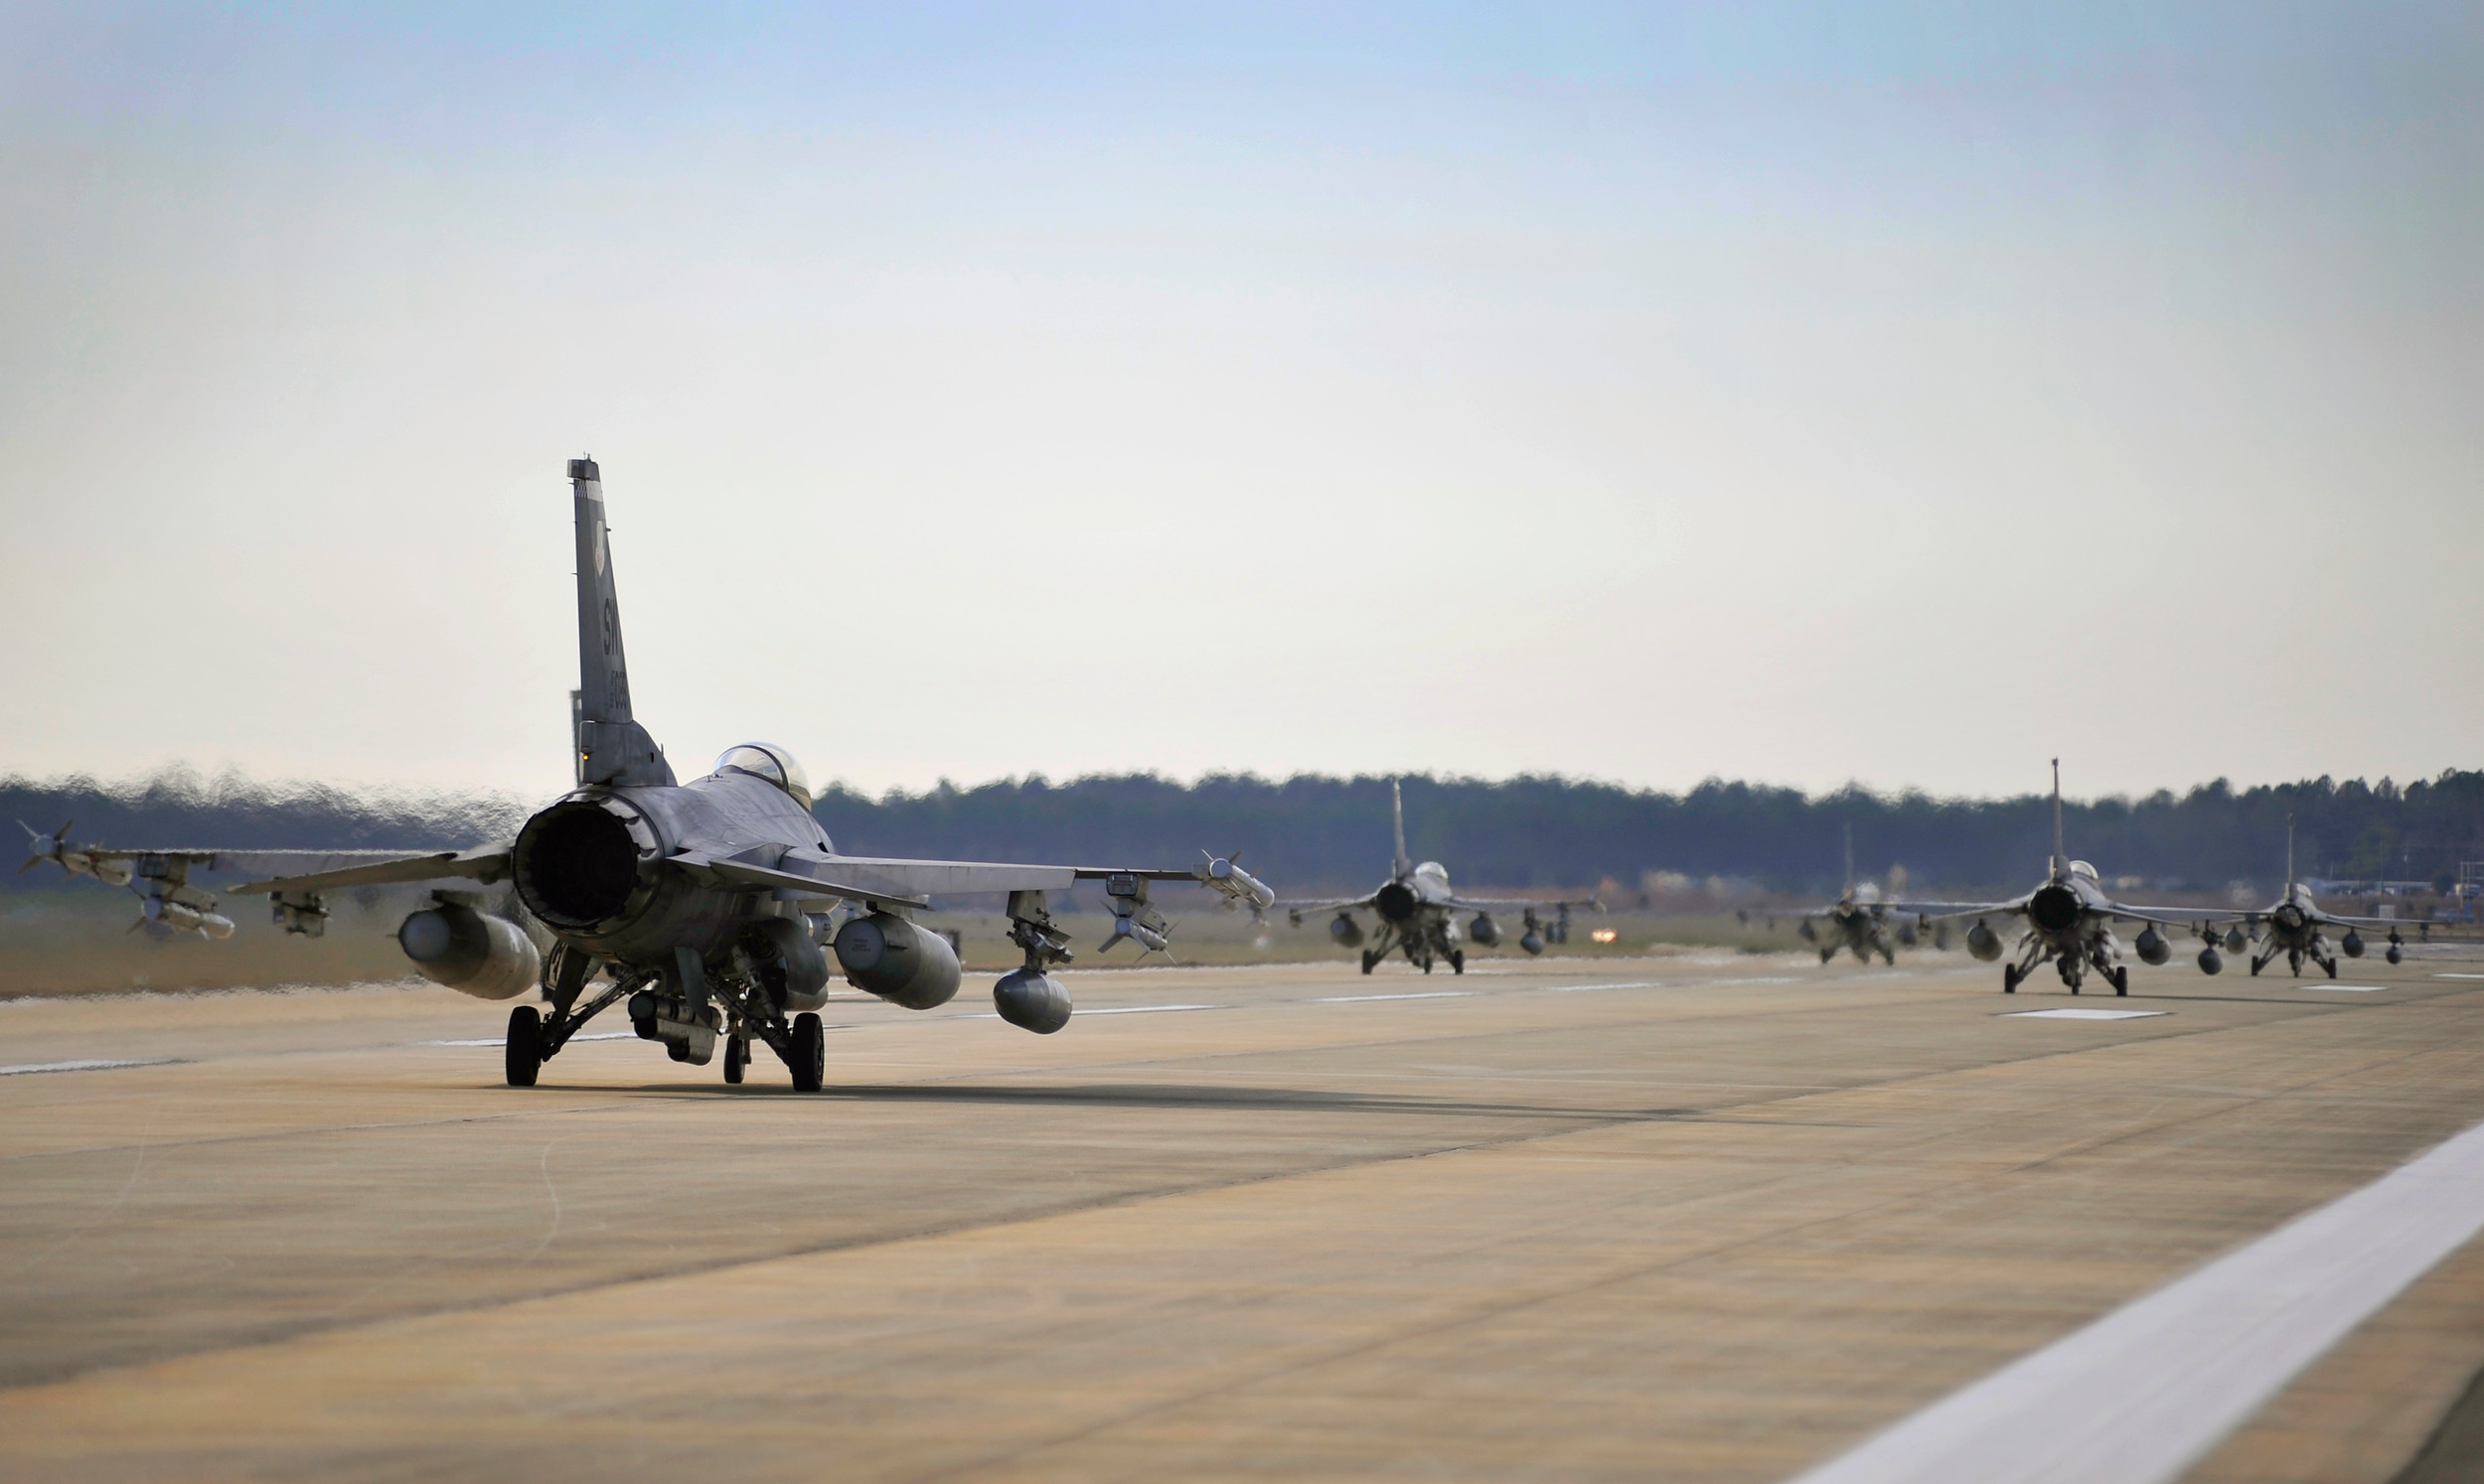 Several U.S. Air Force F-16 Fighting Falcons taxi down the Shaw runway after being prepped and launched during an Operational Readiness Exercise, Jan. 31, 2012, Shaw Air Force Base.